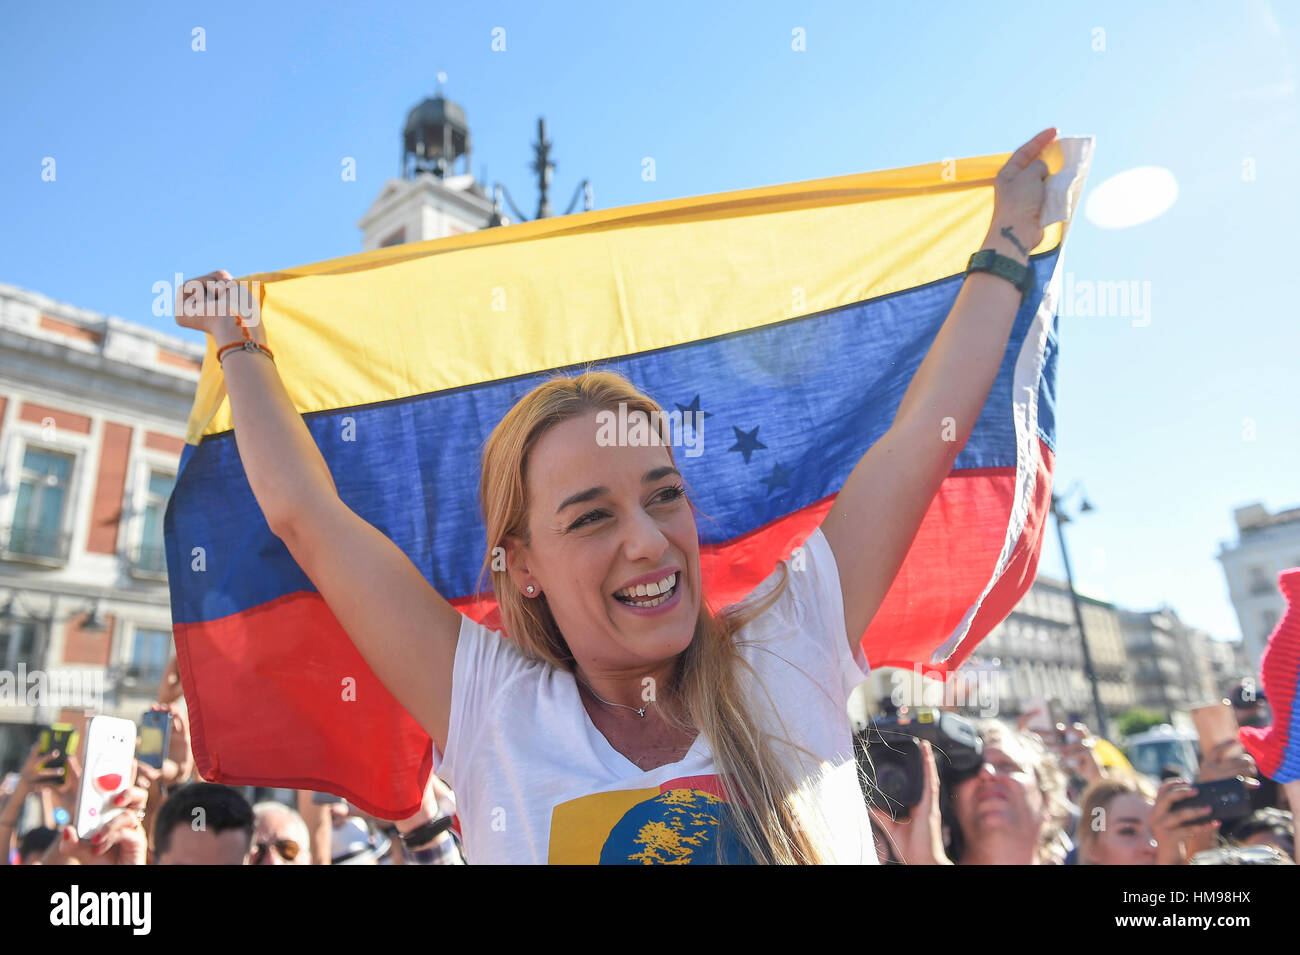 Venezuelan opposition, Lilian Tintori during the campaign to collect medical supplies 'Rescue Venezuela' in the Puerta del Sol in Madrid on Tuesday June 7, 2016. Stock Photo